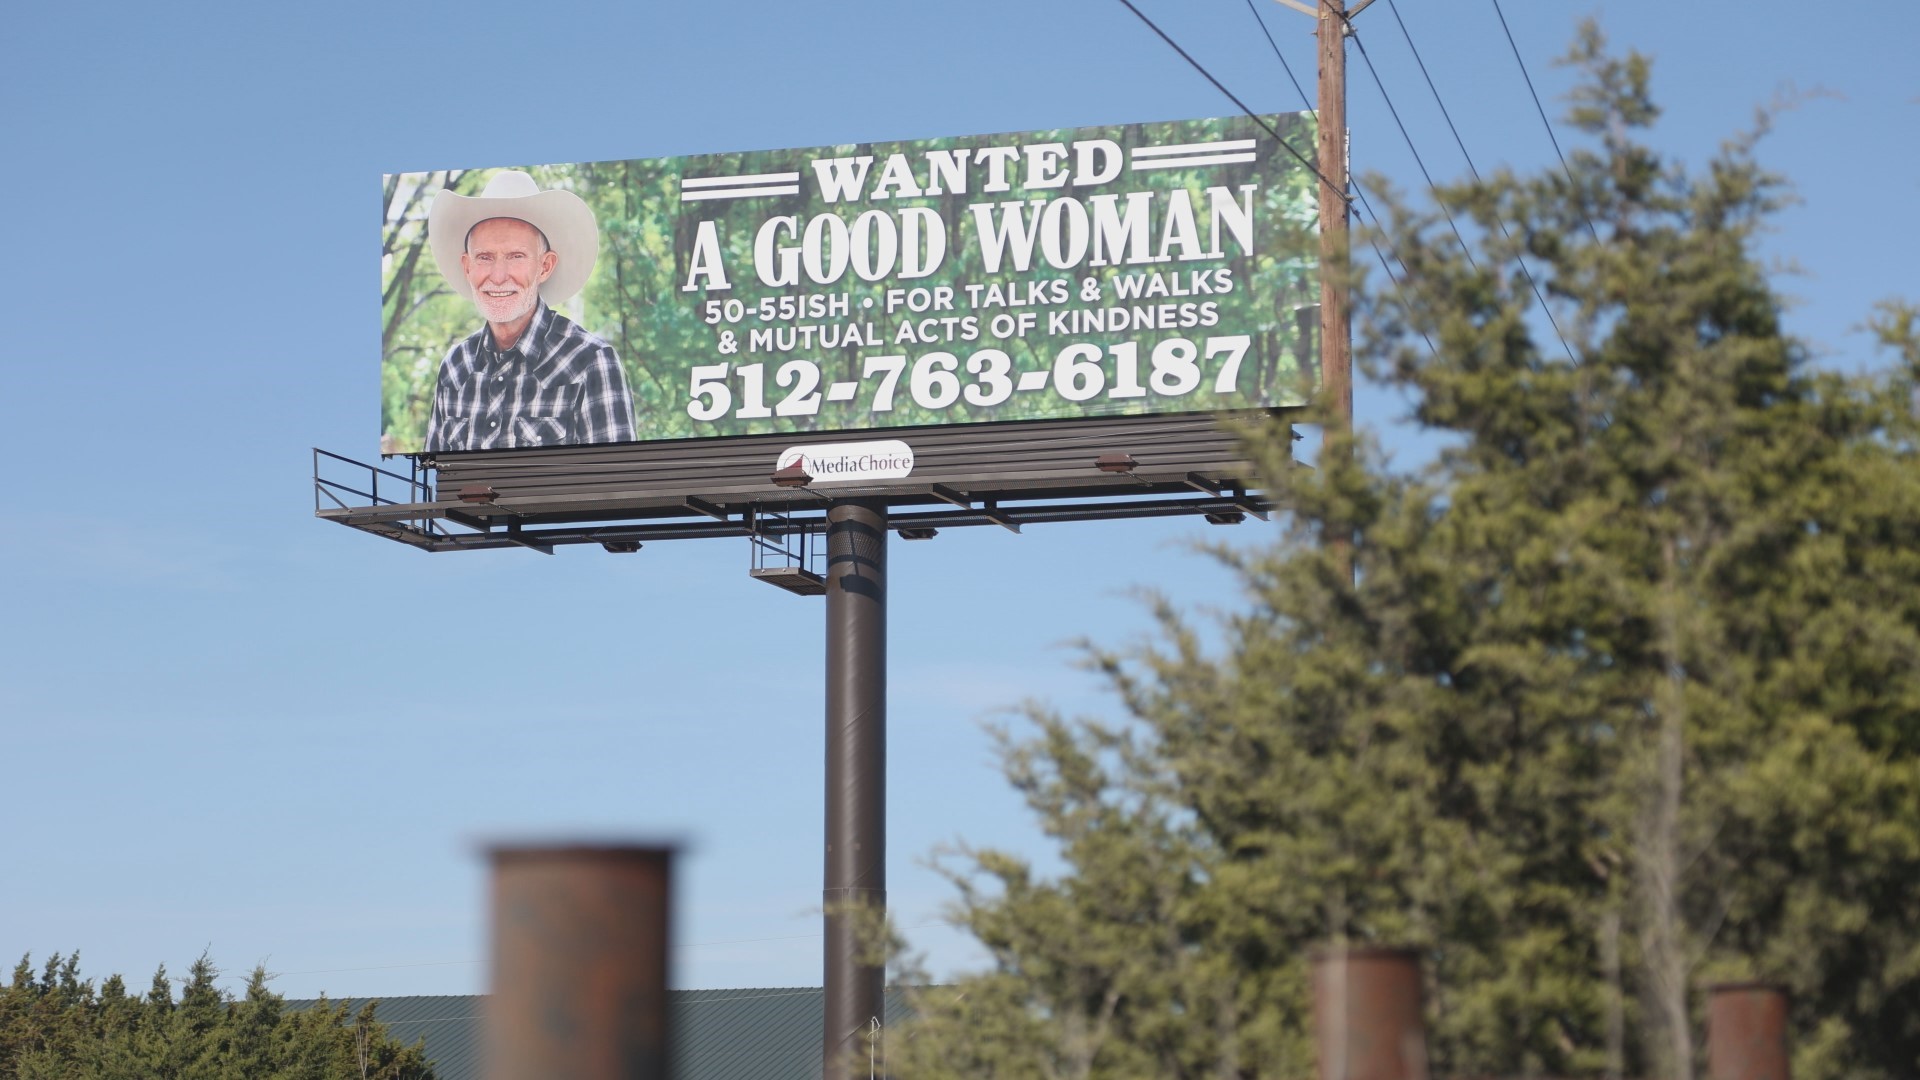 The billboard has been up for a few months and now he's getting anywhere from 30 to 40 calls a day. But Jim Bays is hoping this finds him love.